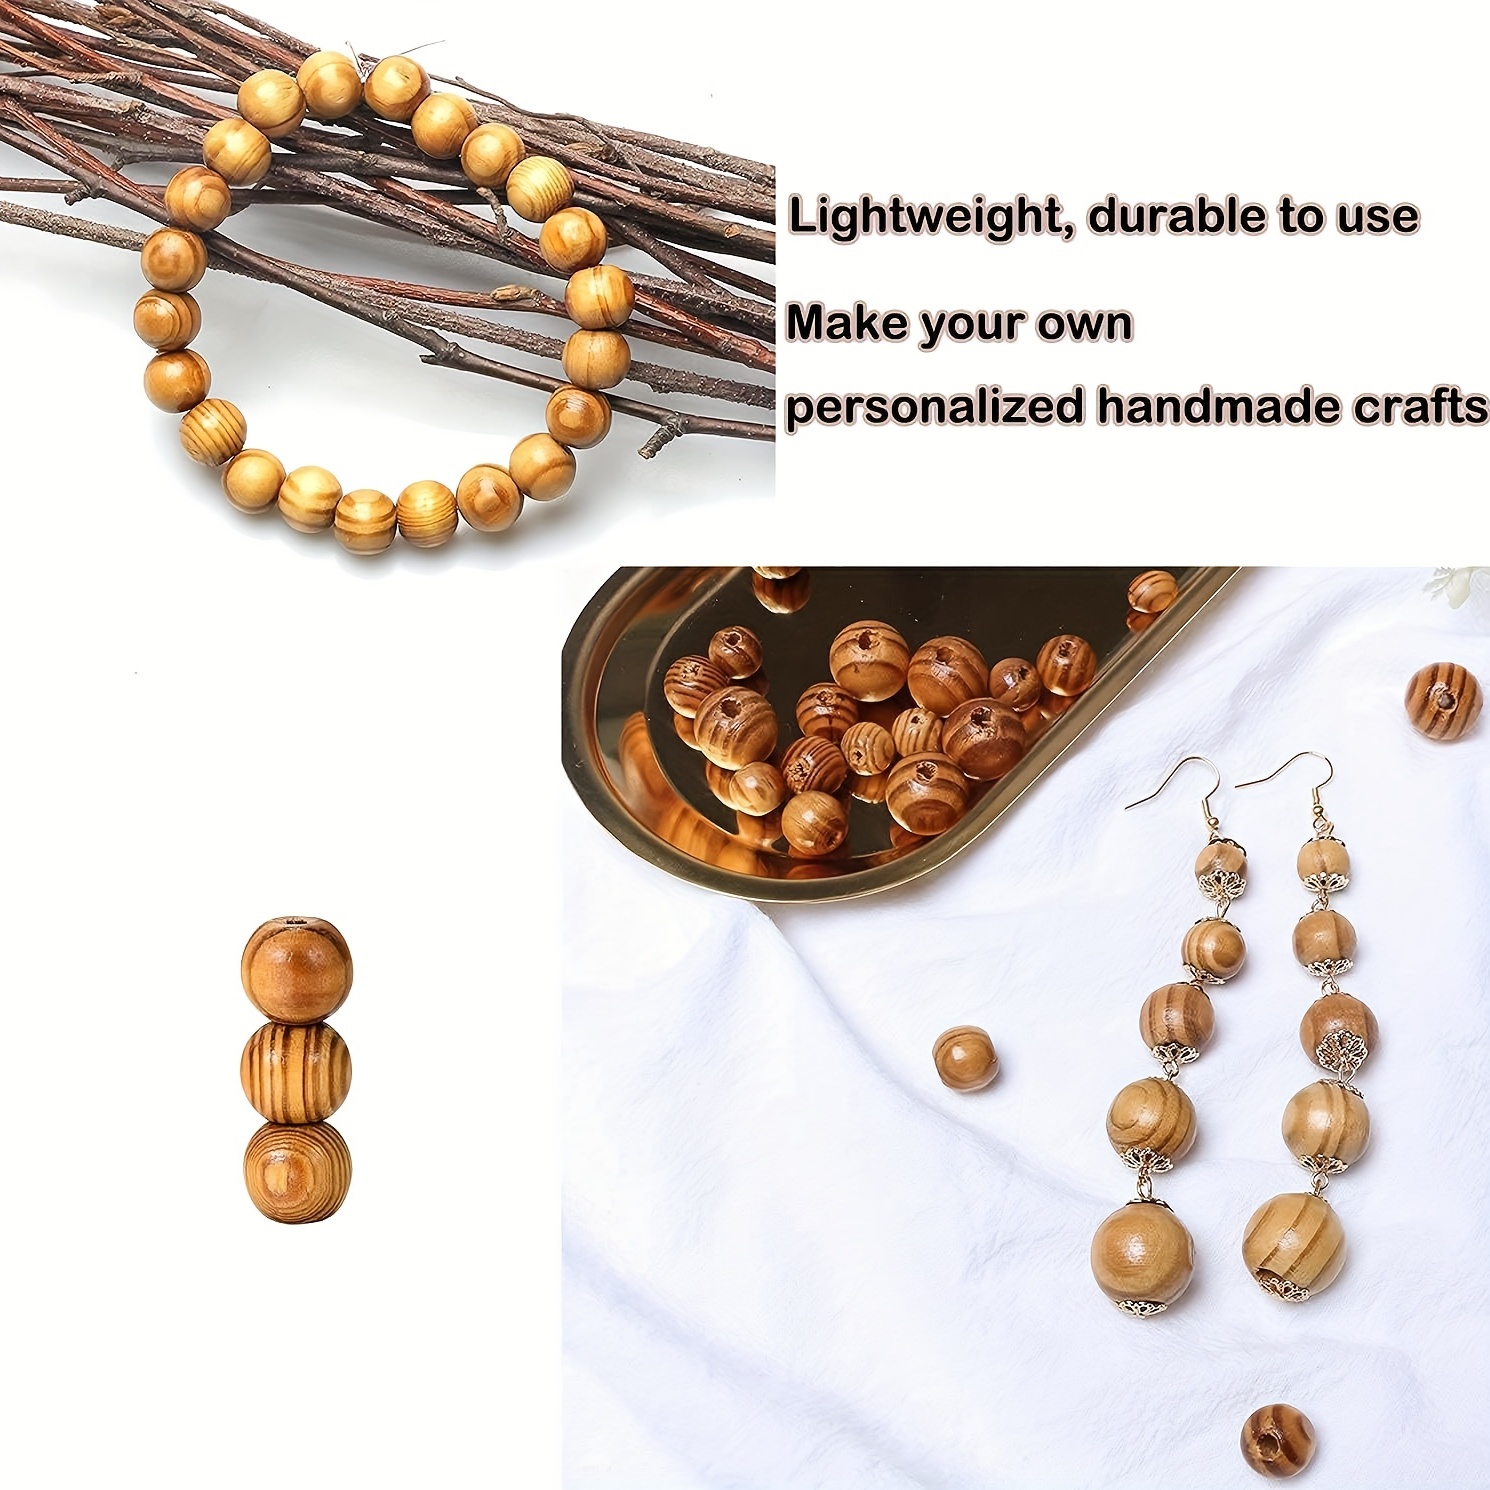 How to Make Your Own Wooden Beads / The Beading Gem